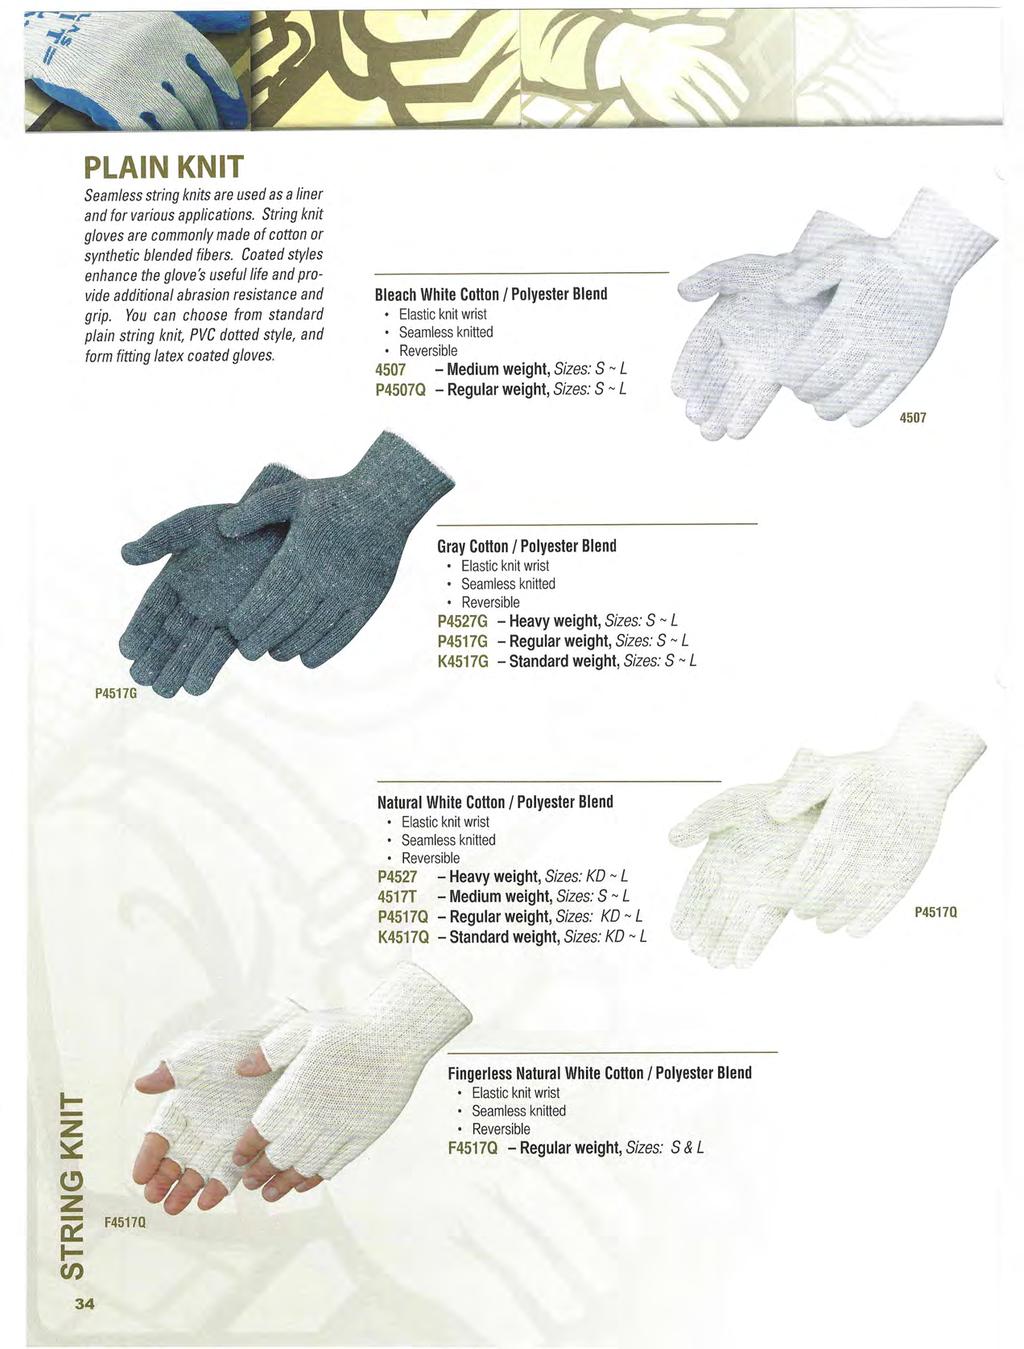 PLAIN KNIT Seamless string knits are used as a liner and for various applications. String knit gloves are commonly made of cotton or synthetic blended fibers.